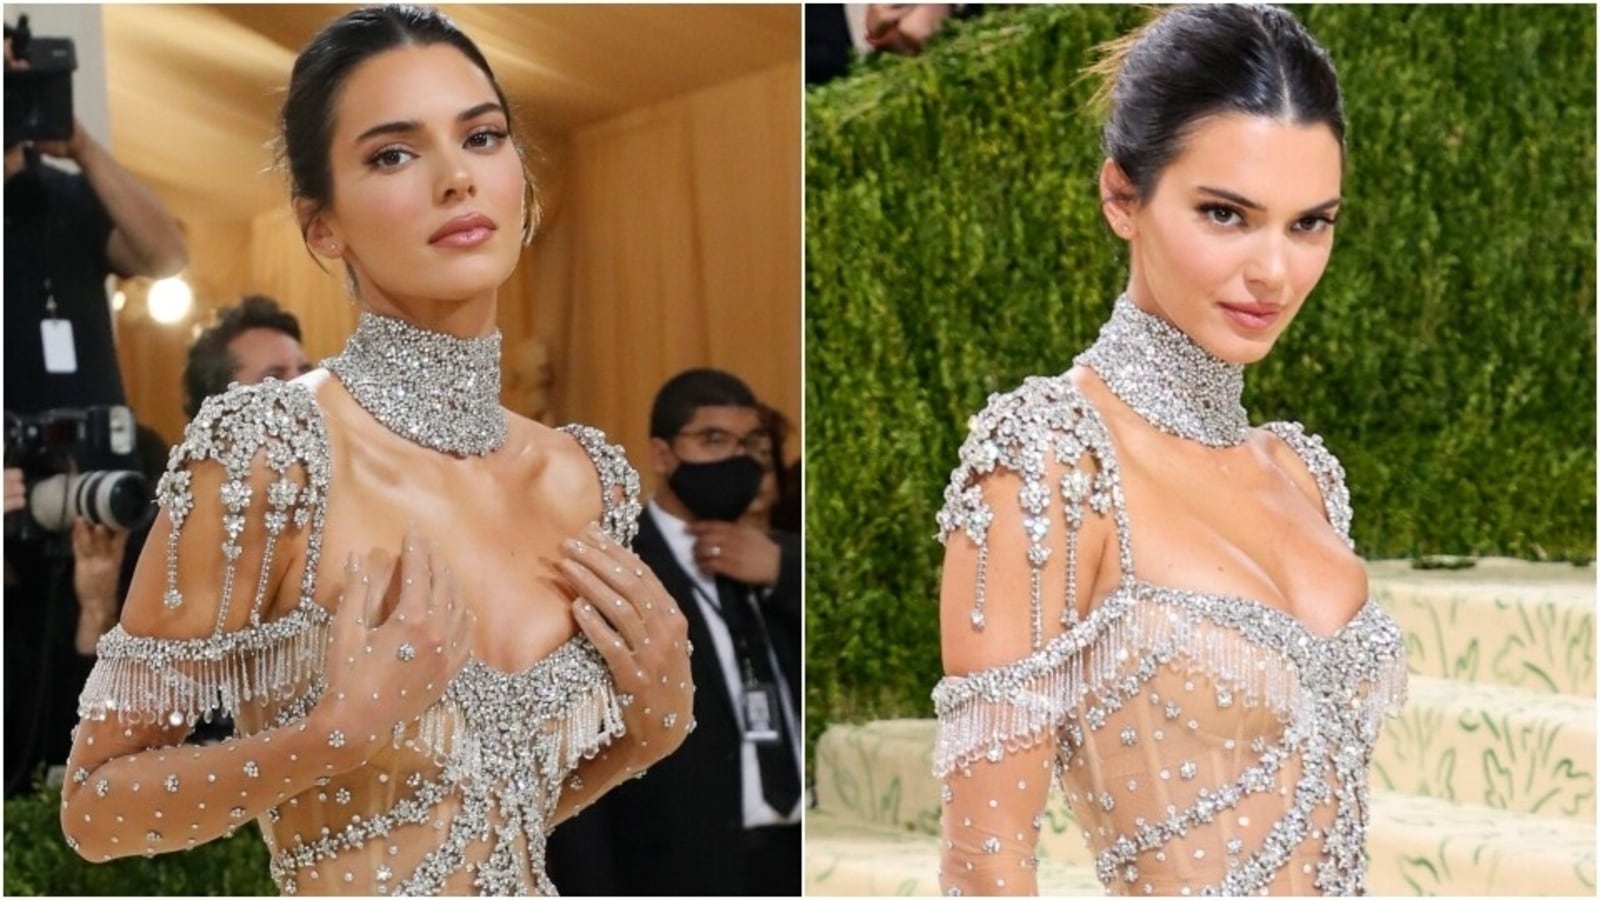 Kendall Jenner hits Met Gala 2021 red carpet in entirely see-through  Givenchy gown | Fashion Trends - Hindustan Times